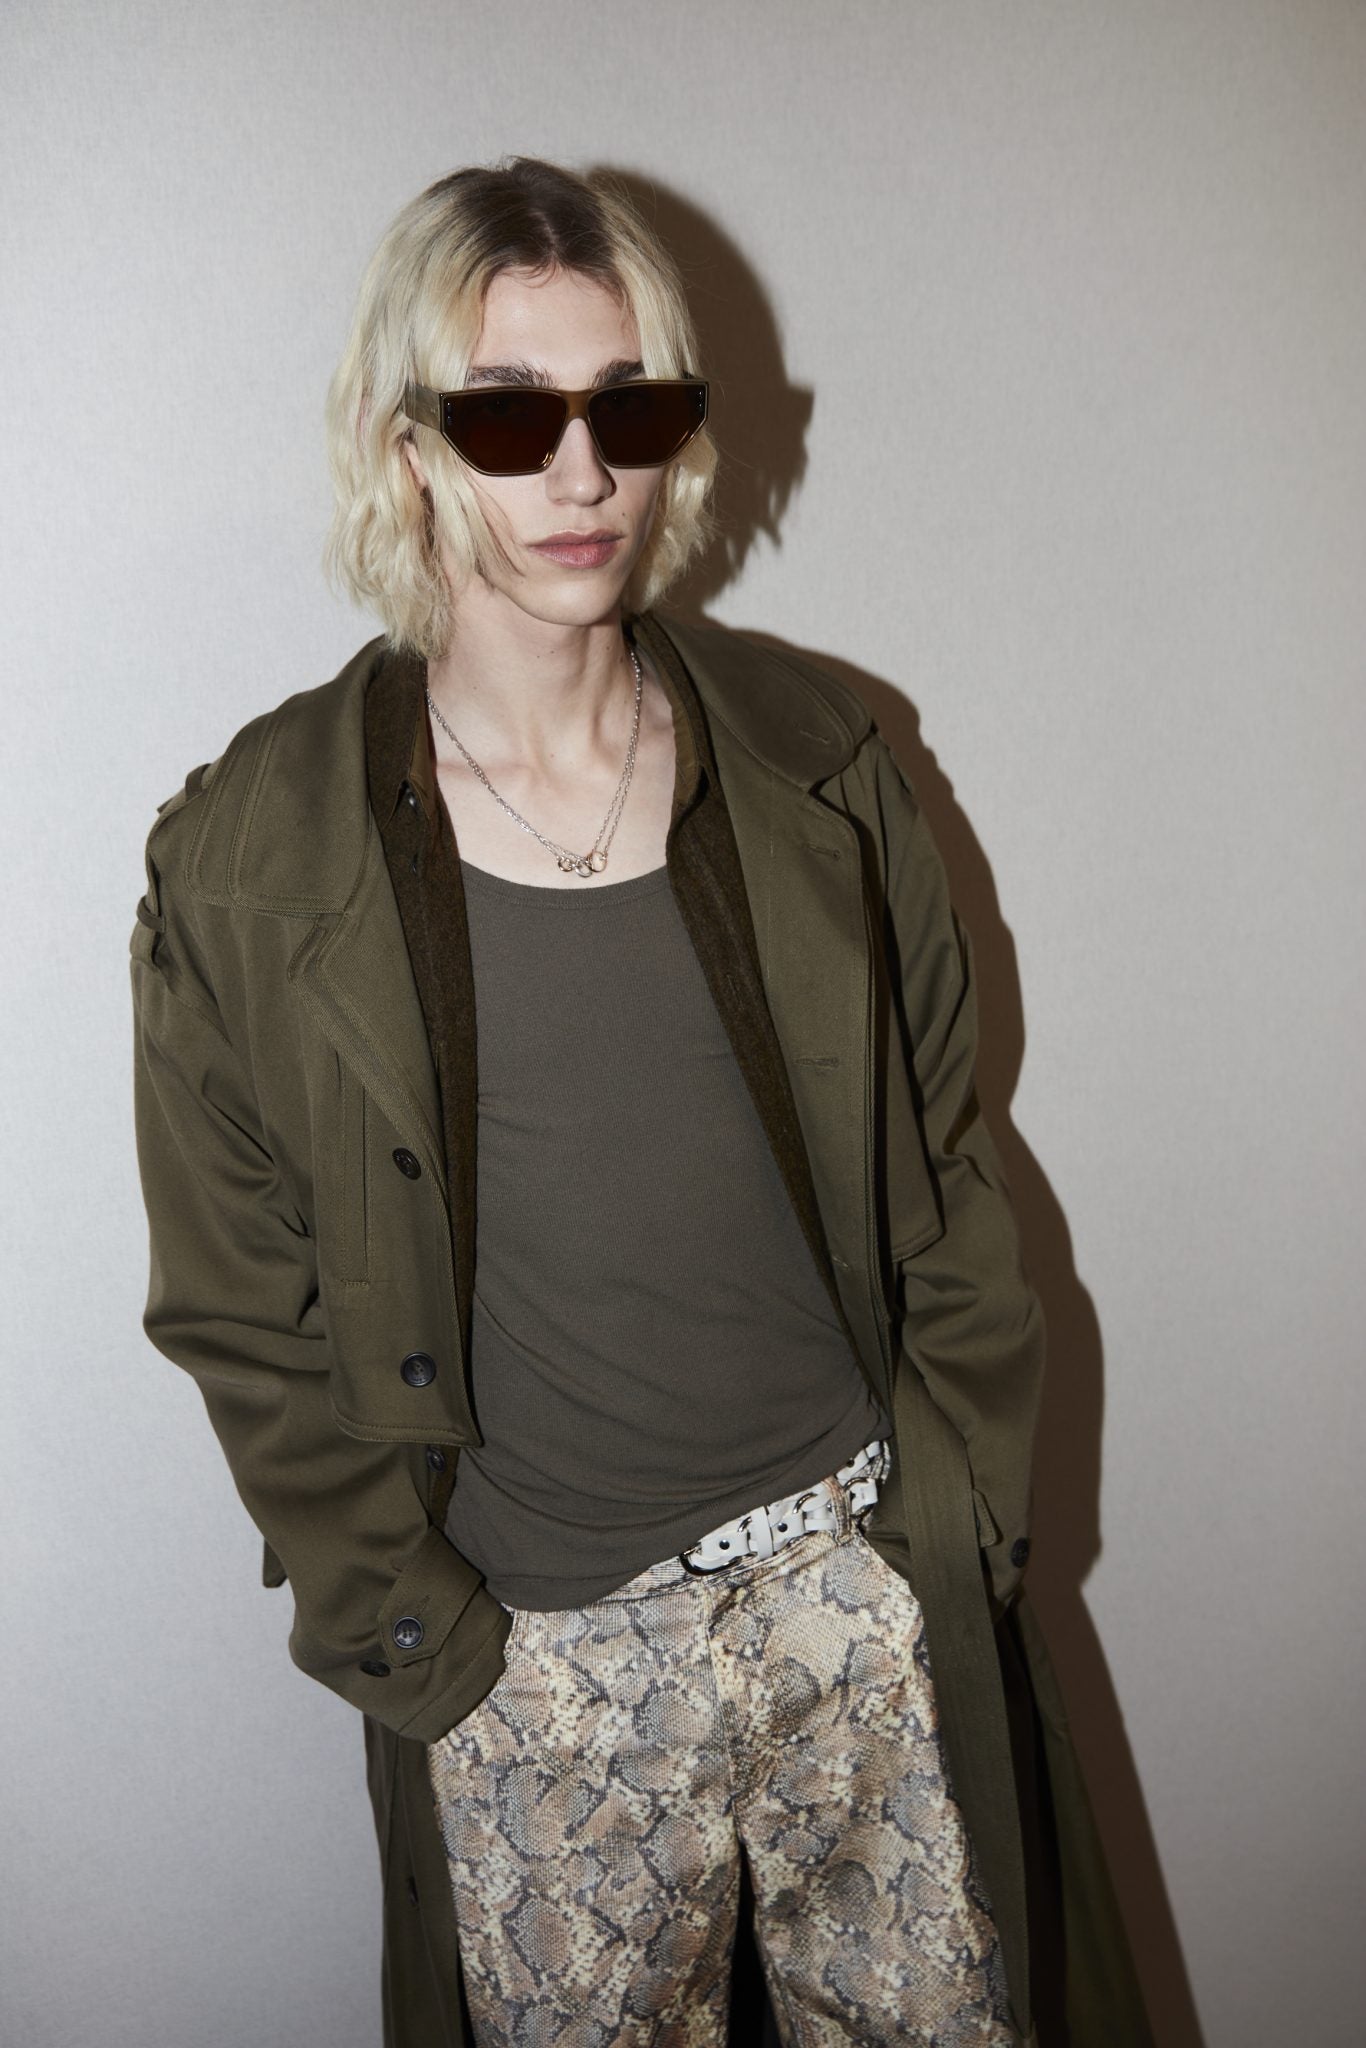 Cropped backstage image of a model wearing sunglasses, a khaki tee and trench, black and tan snakeskin-printed jeans and a white studded belt.